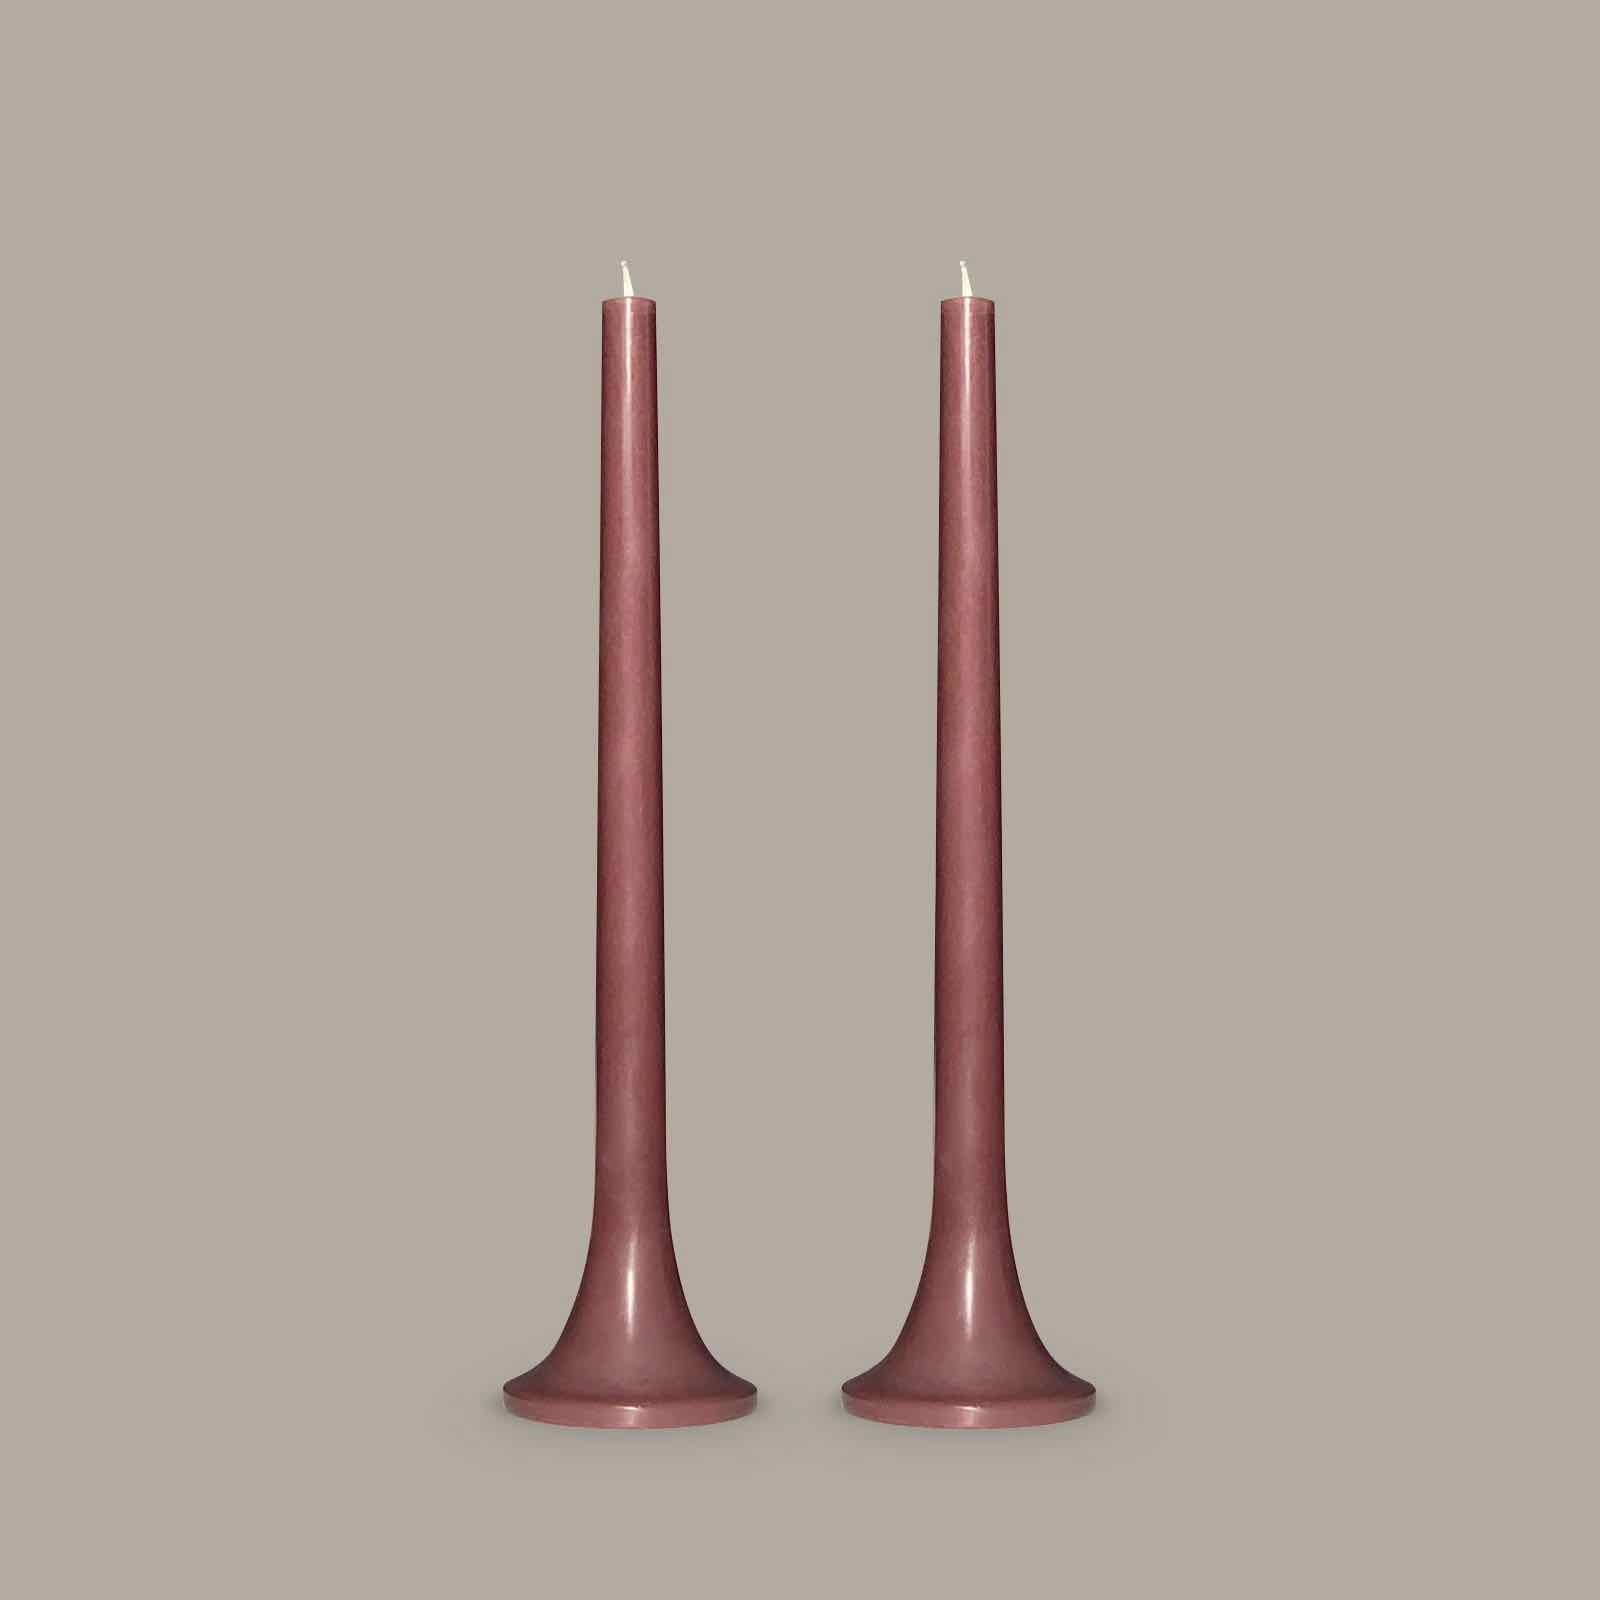 Tall taper candles in neutral brown